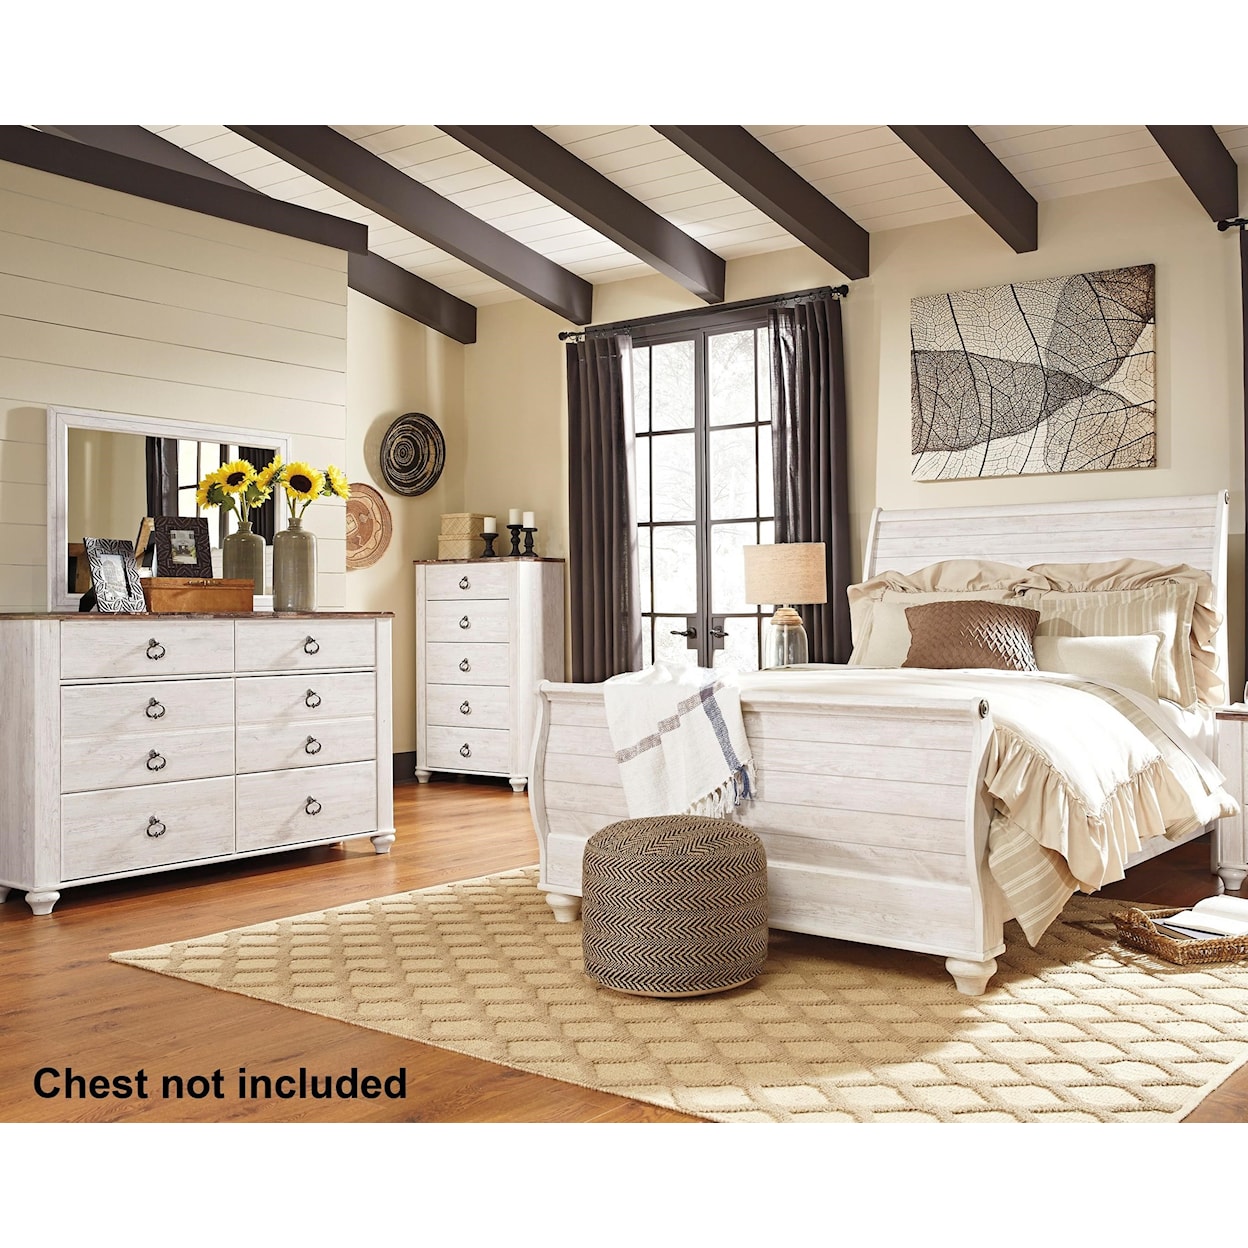 Signature Design by Ashley Furniture Willowton Queen Bedroom Group